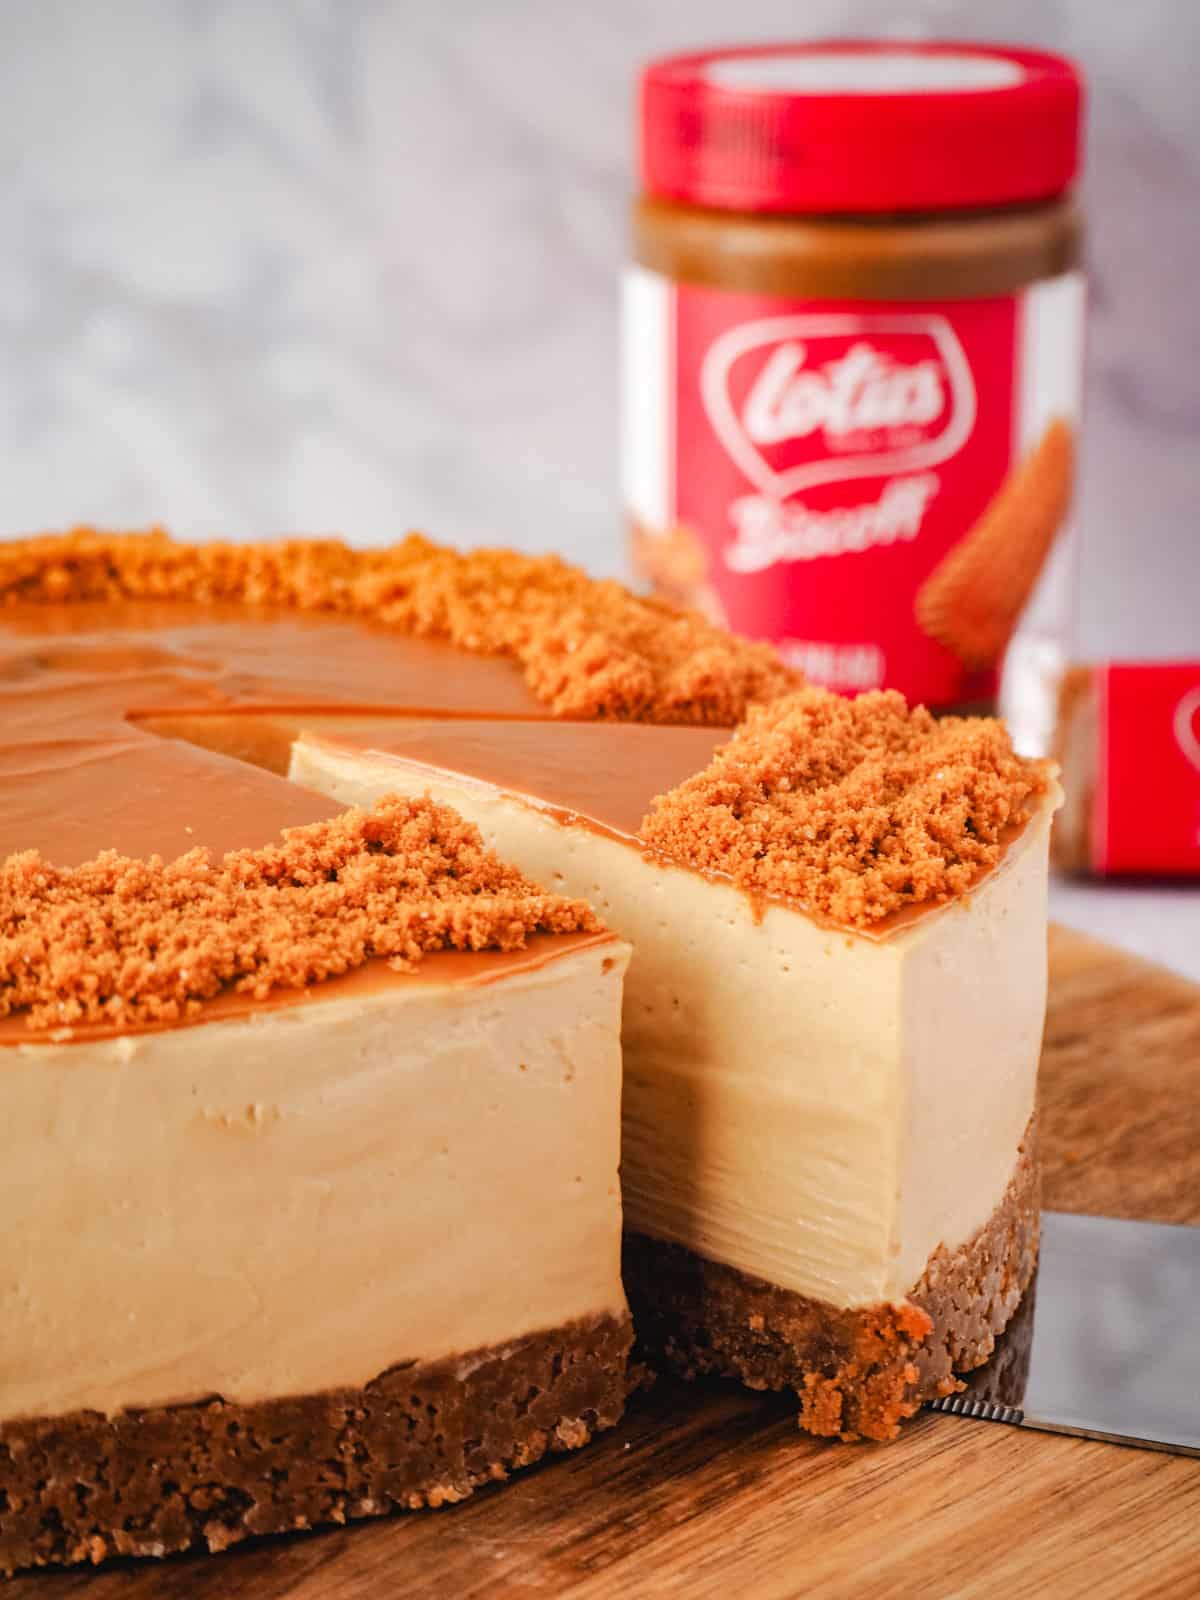 Slice being taken out of cheesecake, with jar of Biscoff in the background.